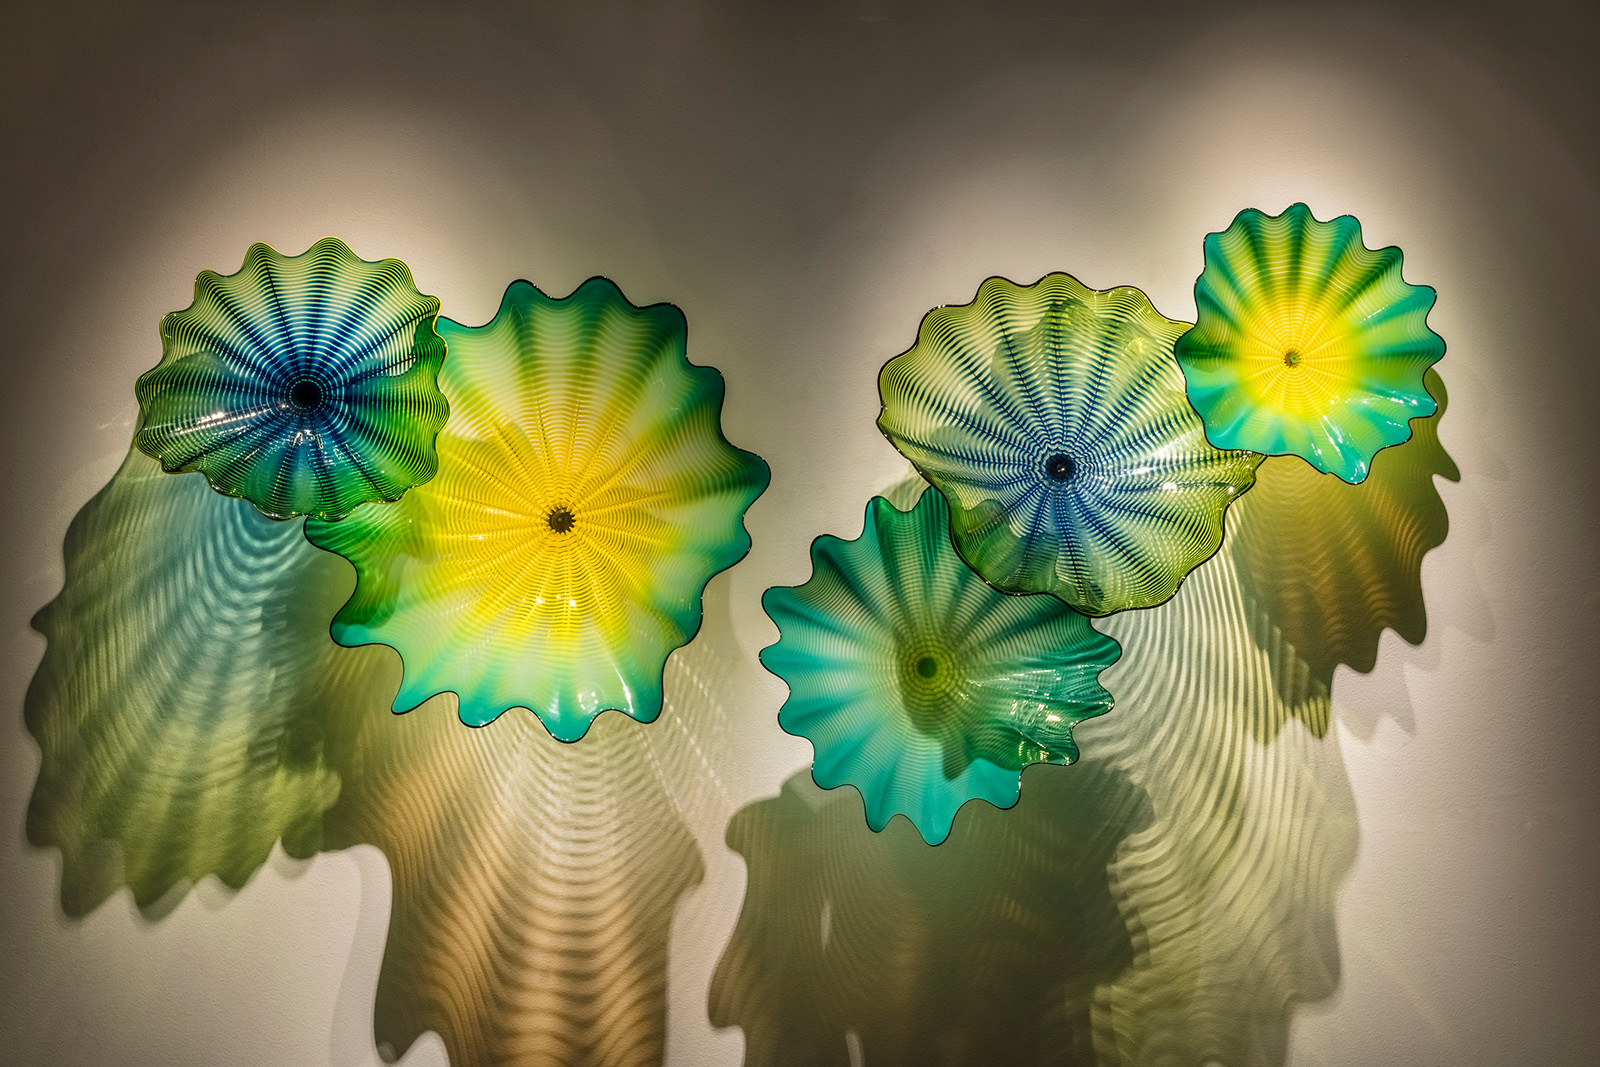 Dale Chihuly, Topaz Verdigris Persian Wall, 2017